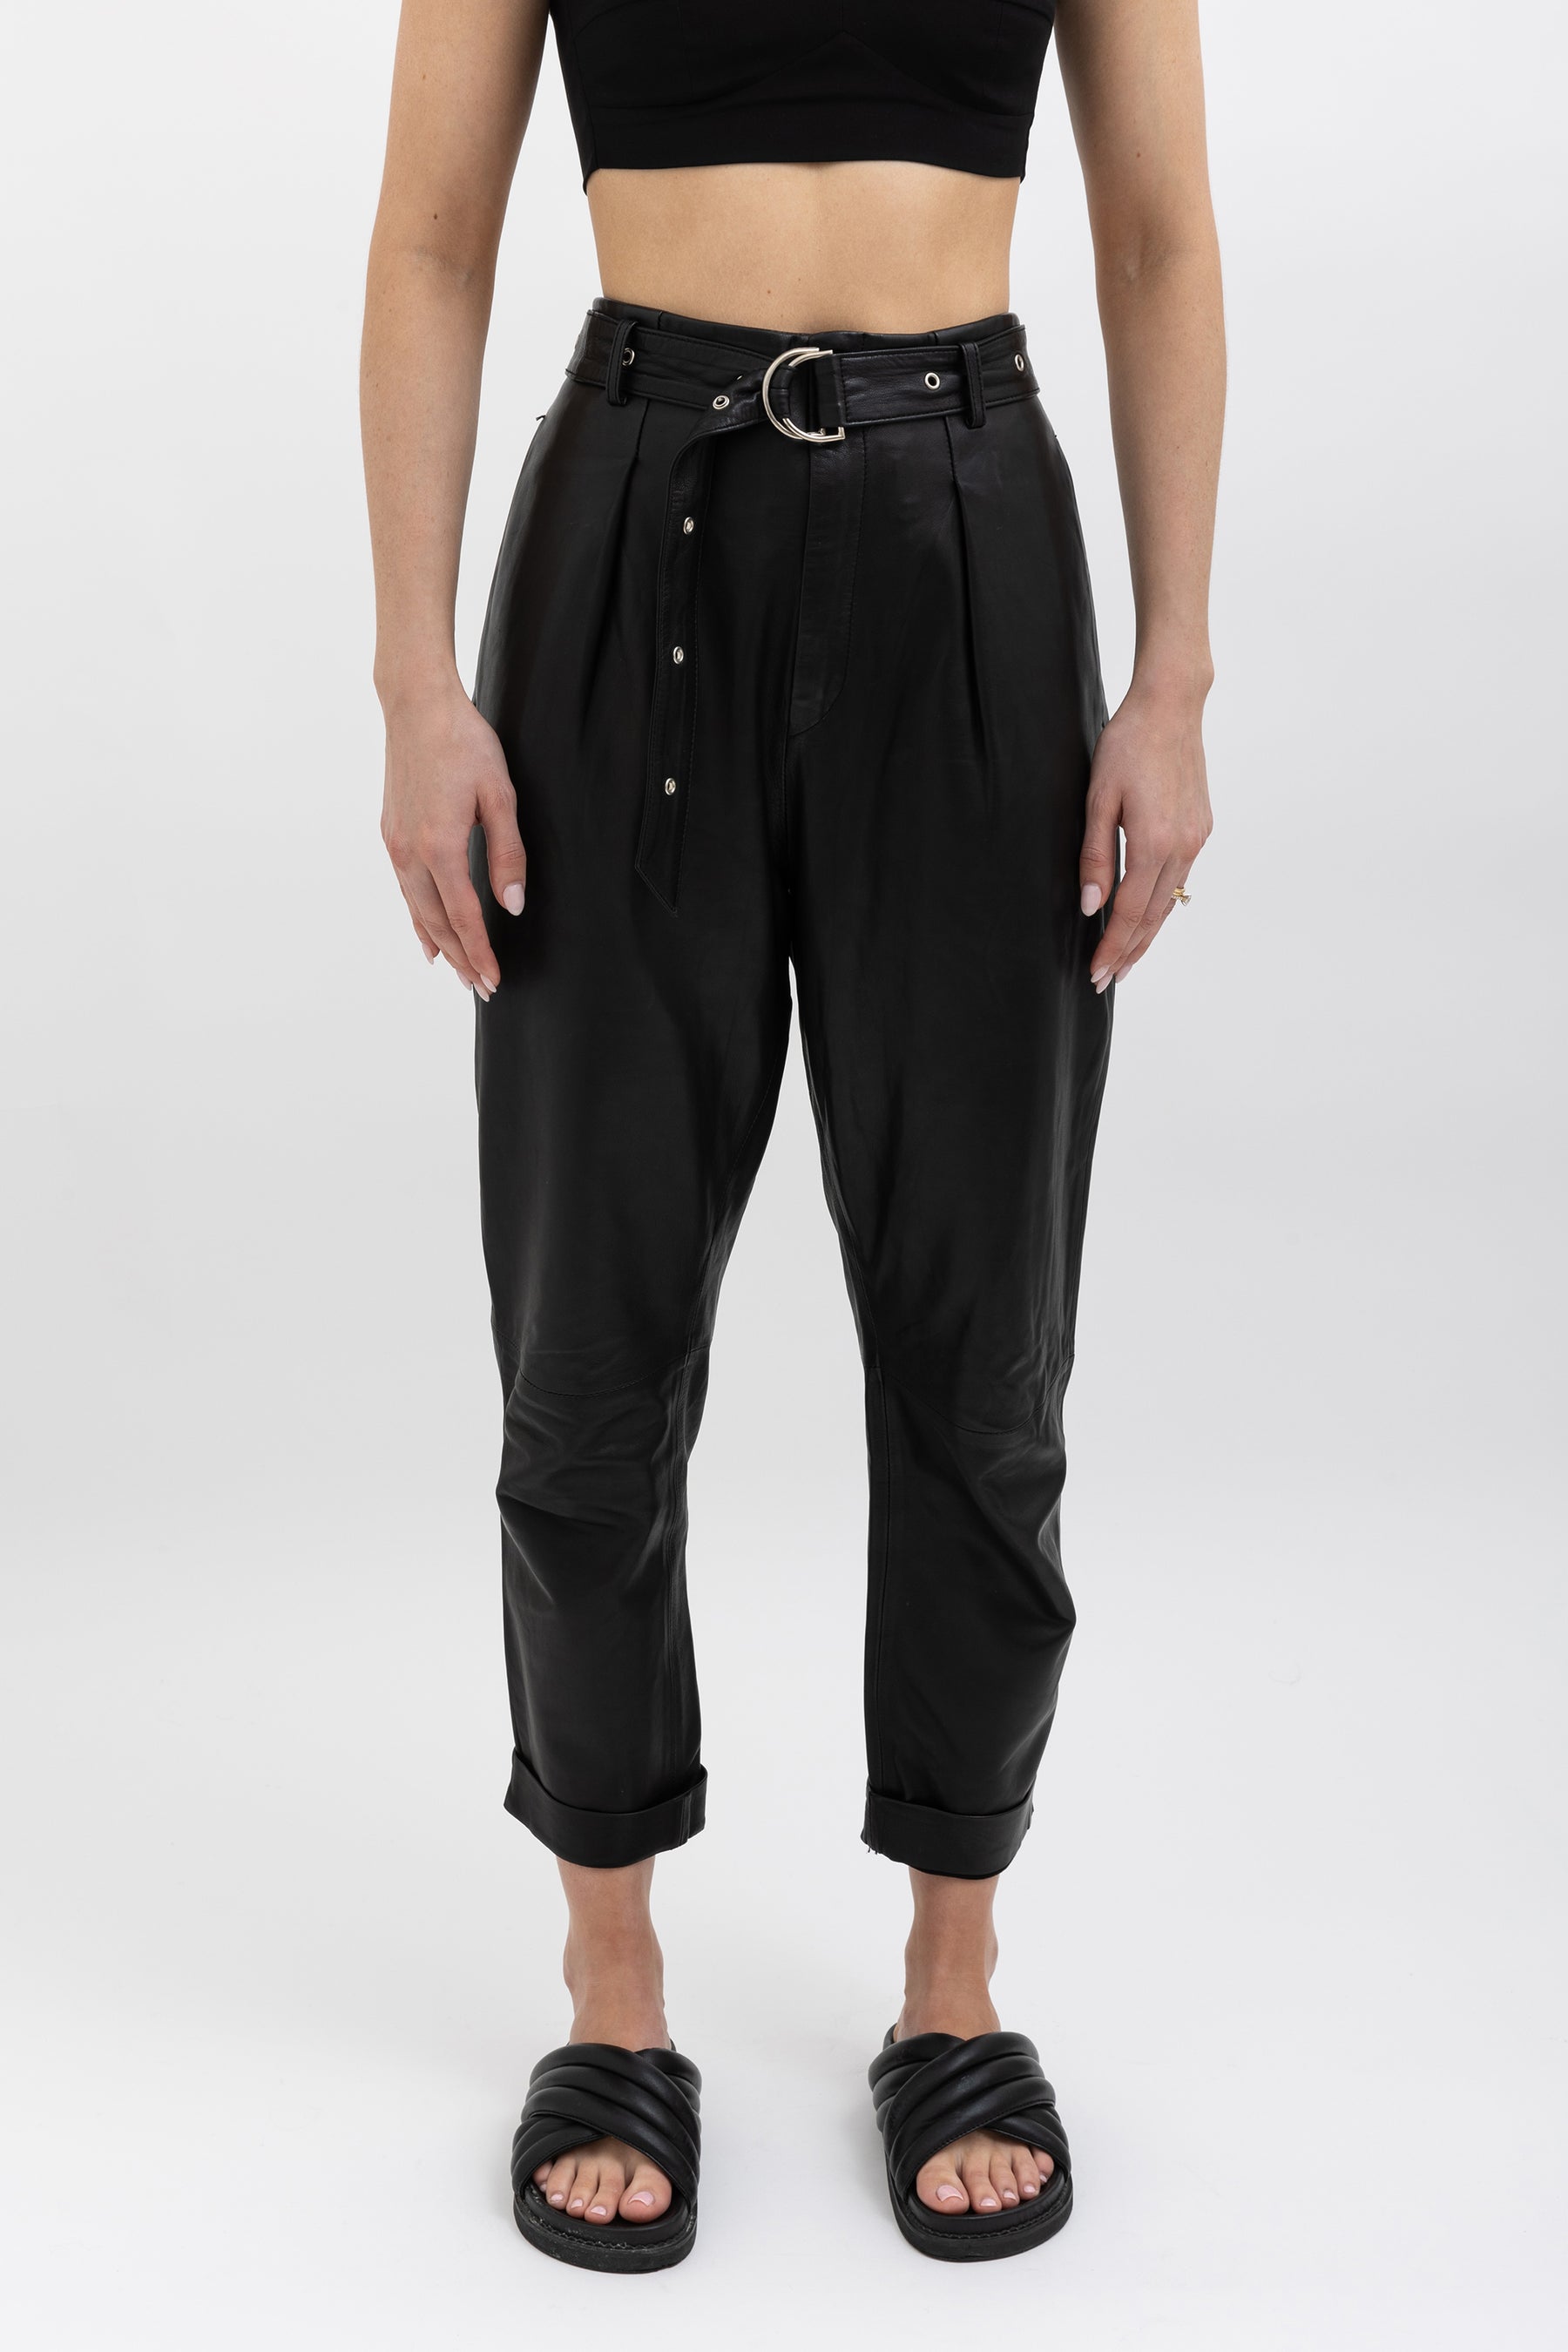 Ceana Belted Leather Pant